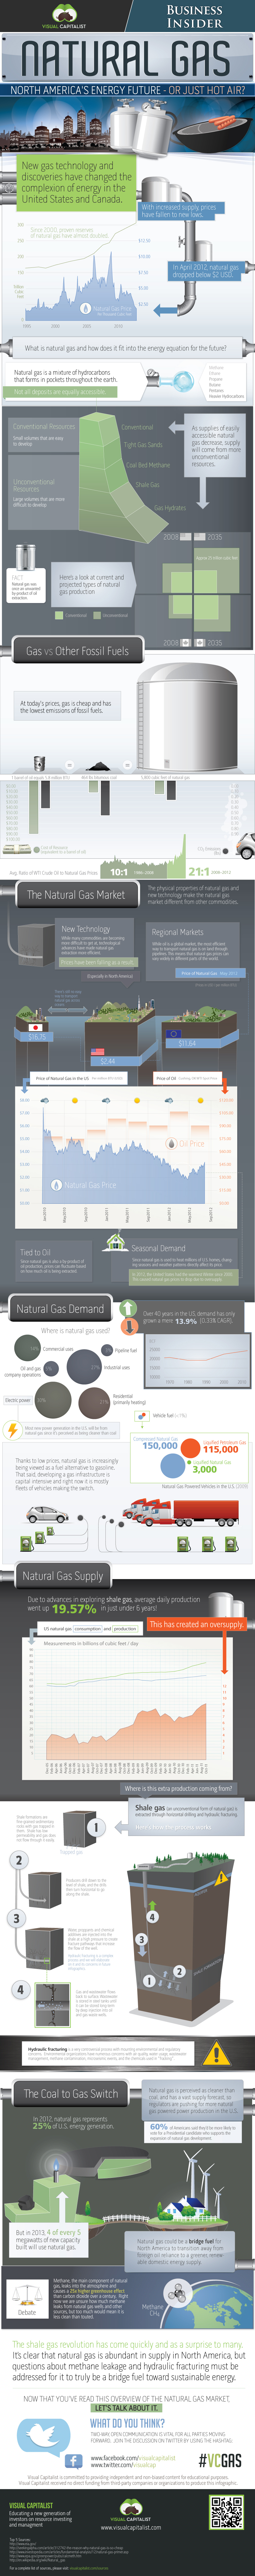 natural-gas-infographic